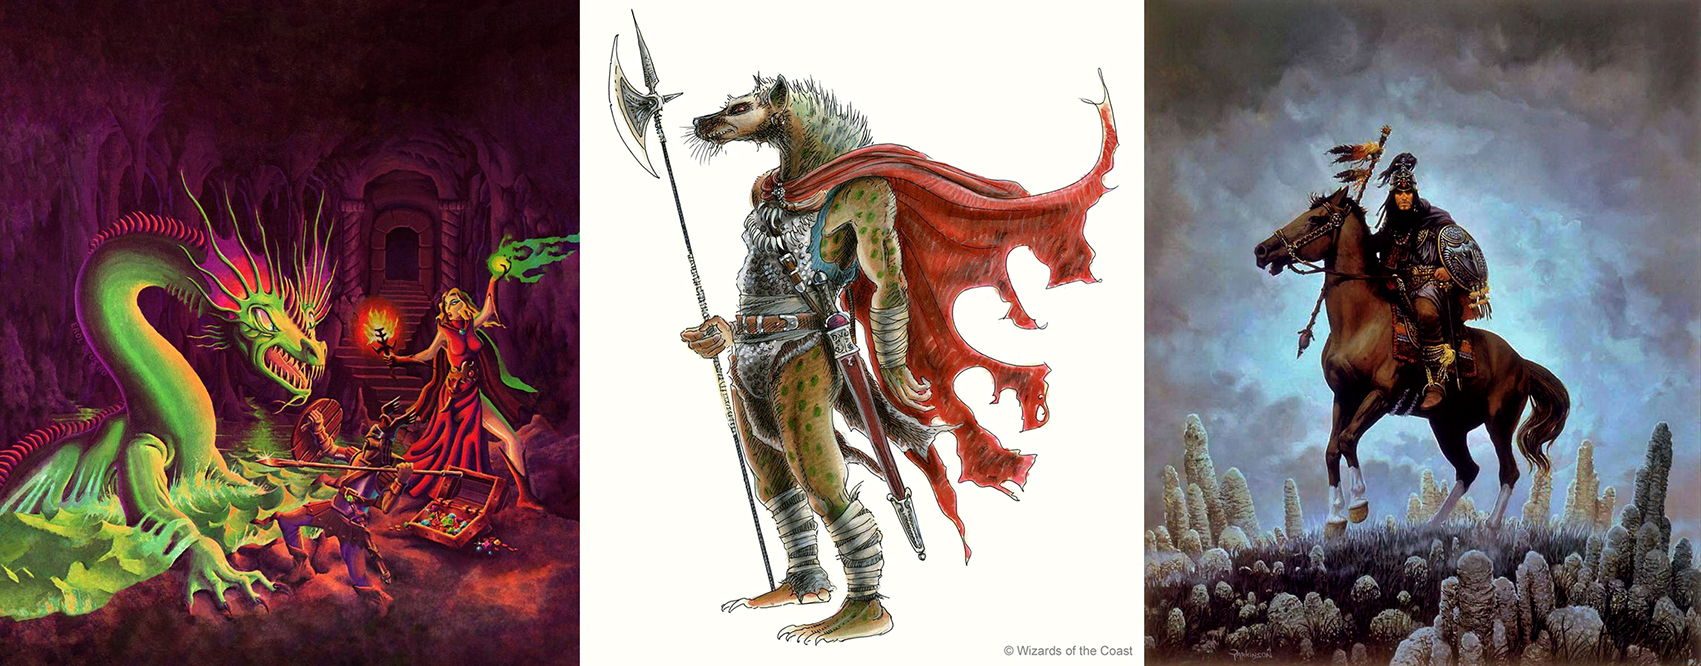 Basic Set cover by Erol Otus (left), Gnoll by Tony DiTerlizzi (centre), Forgotten Realms ‘grey box’ cover by Keith Parkinson (right)